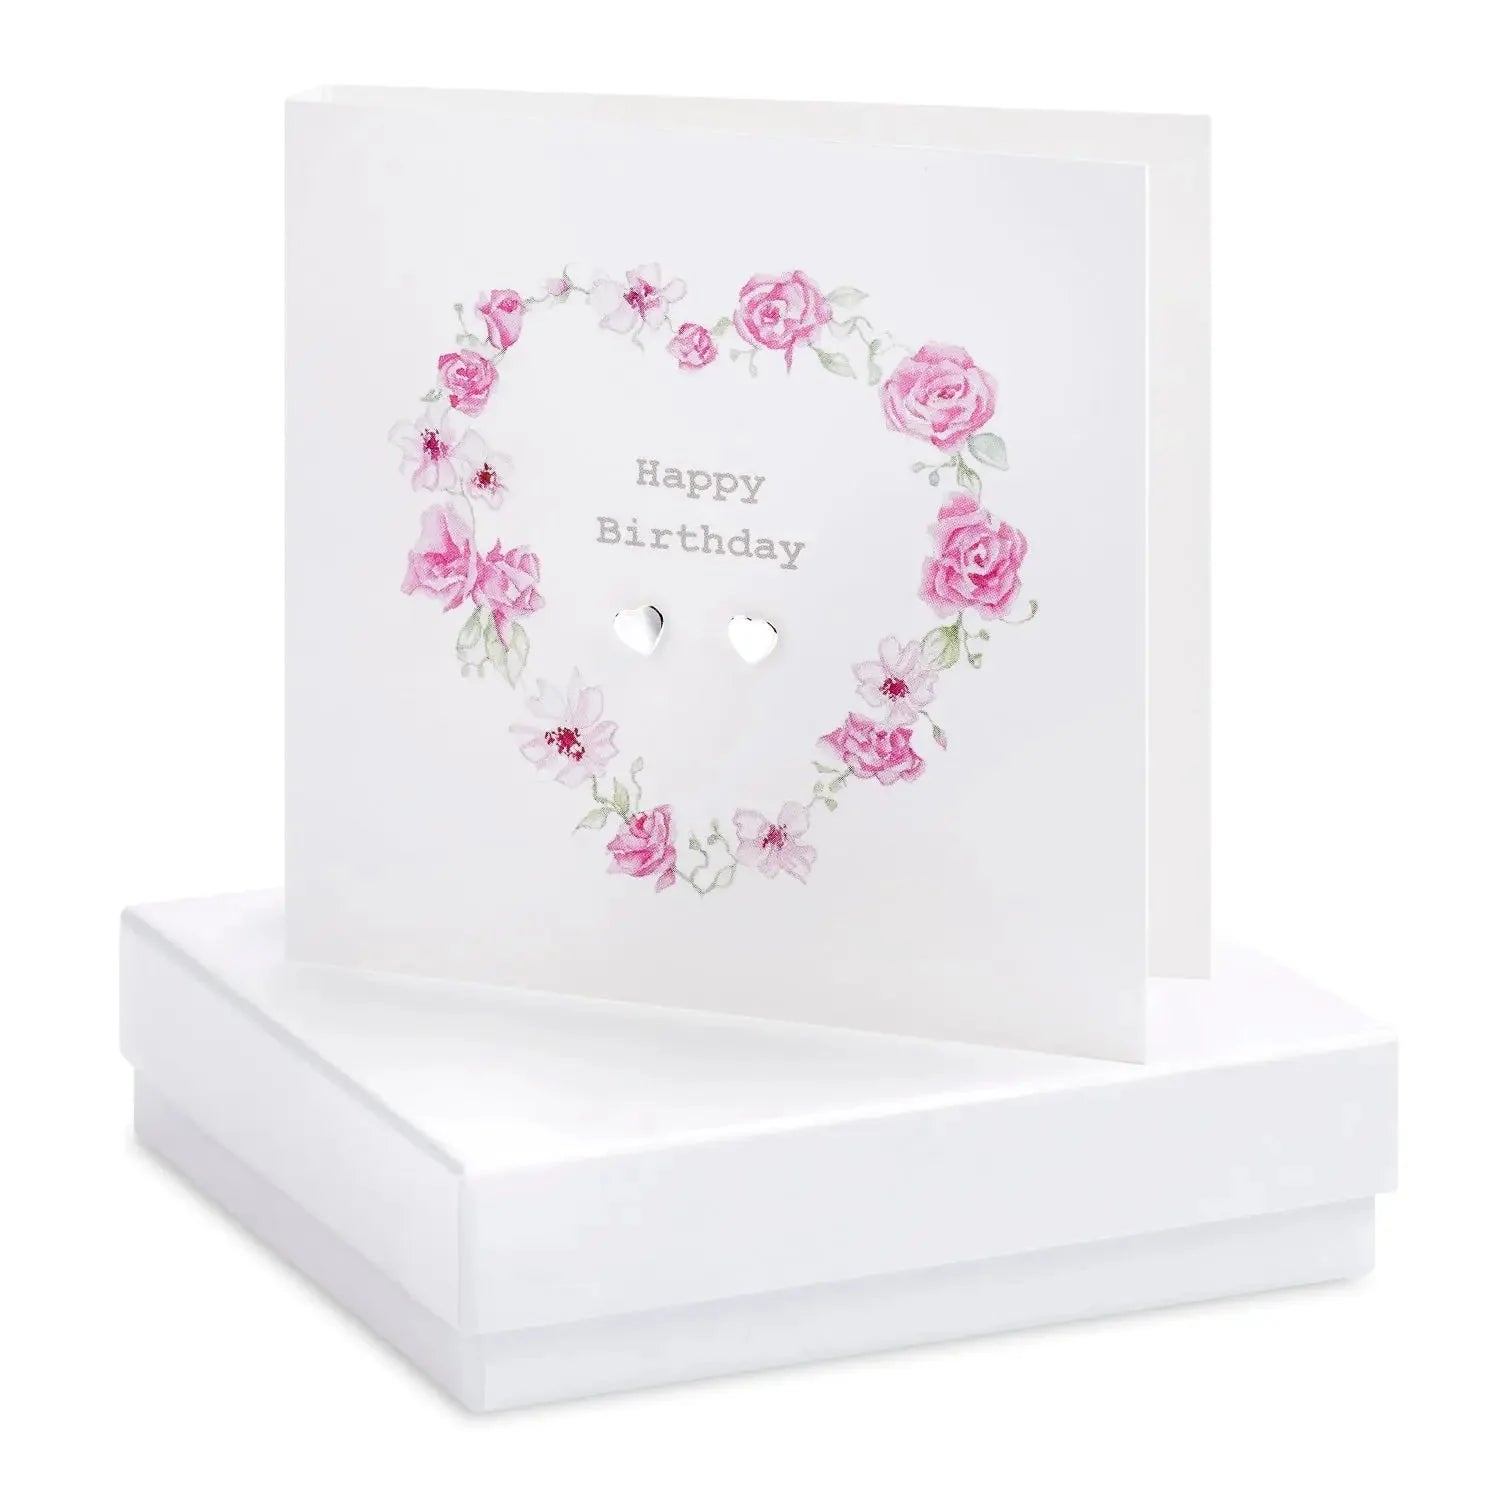 Crumble & Core  Heart Garland Card with Earrings in a White Box by Weirs of Baggot Street